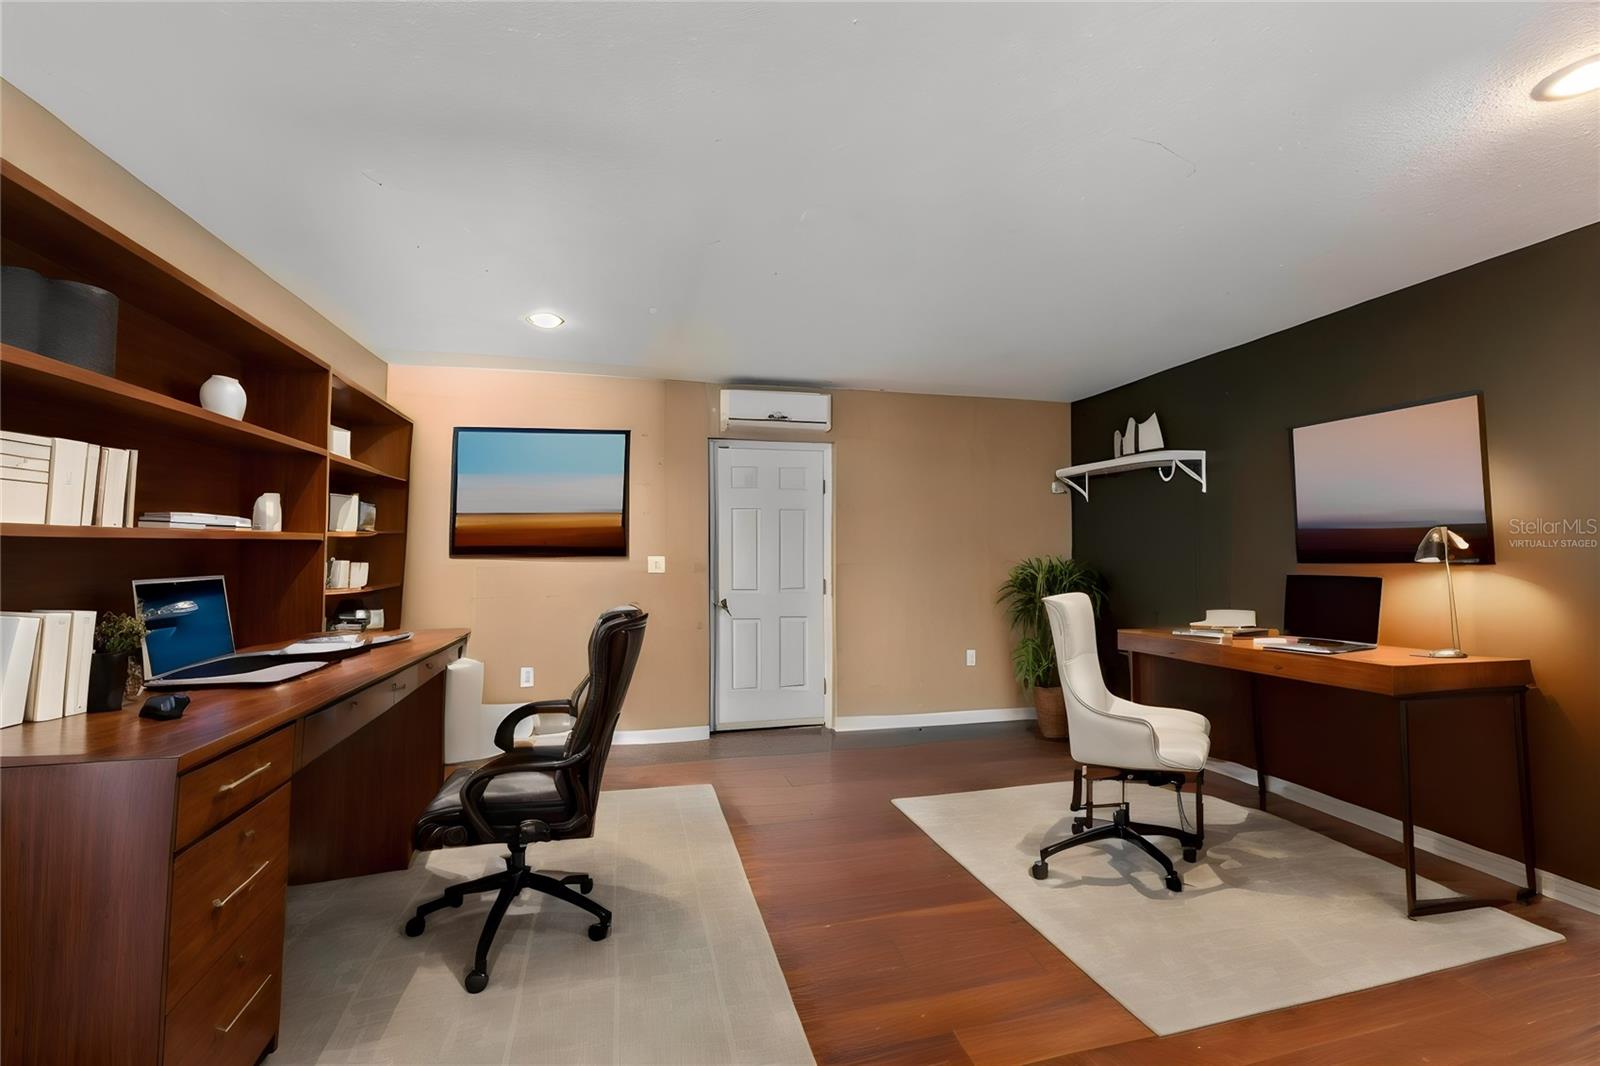 Virtually Staged Office or Exercise Room